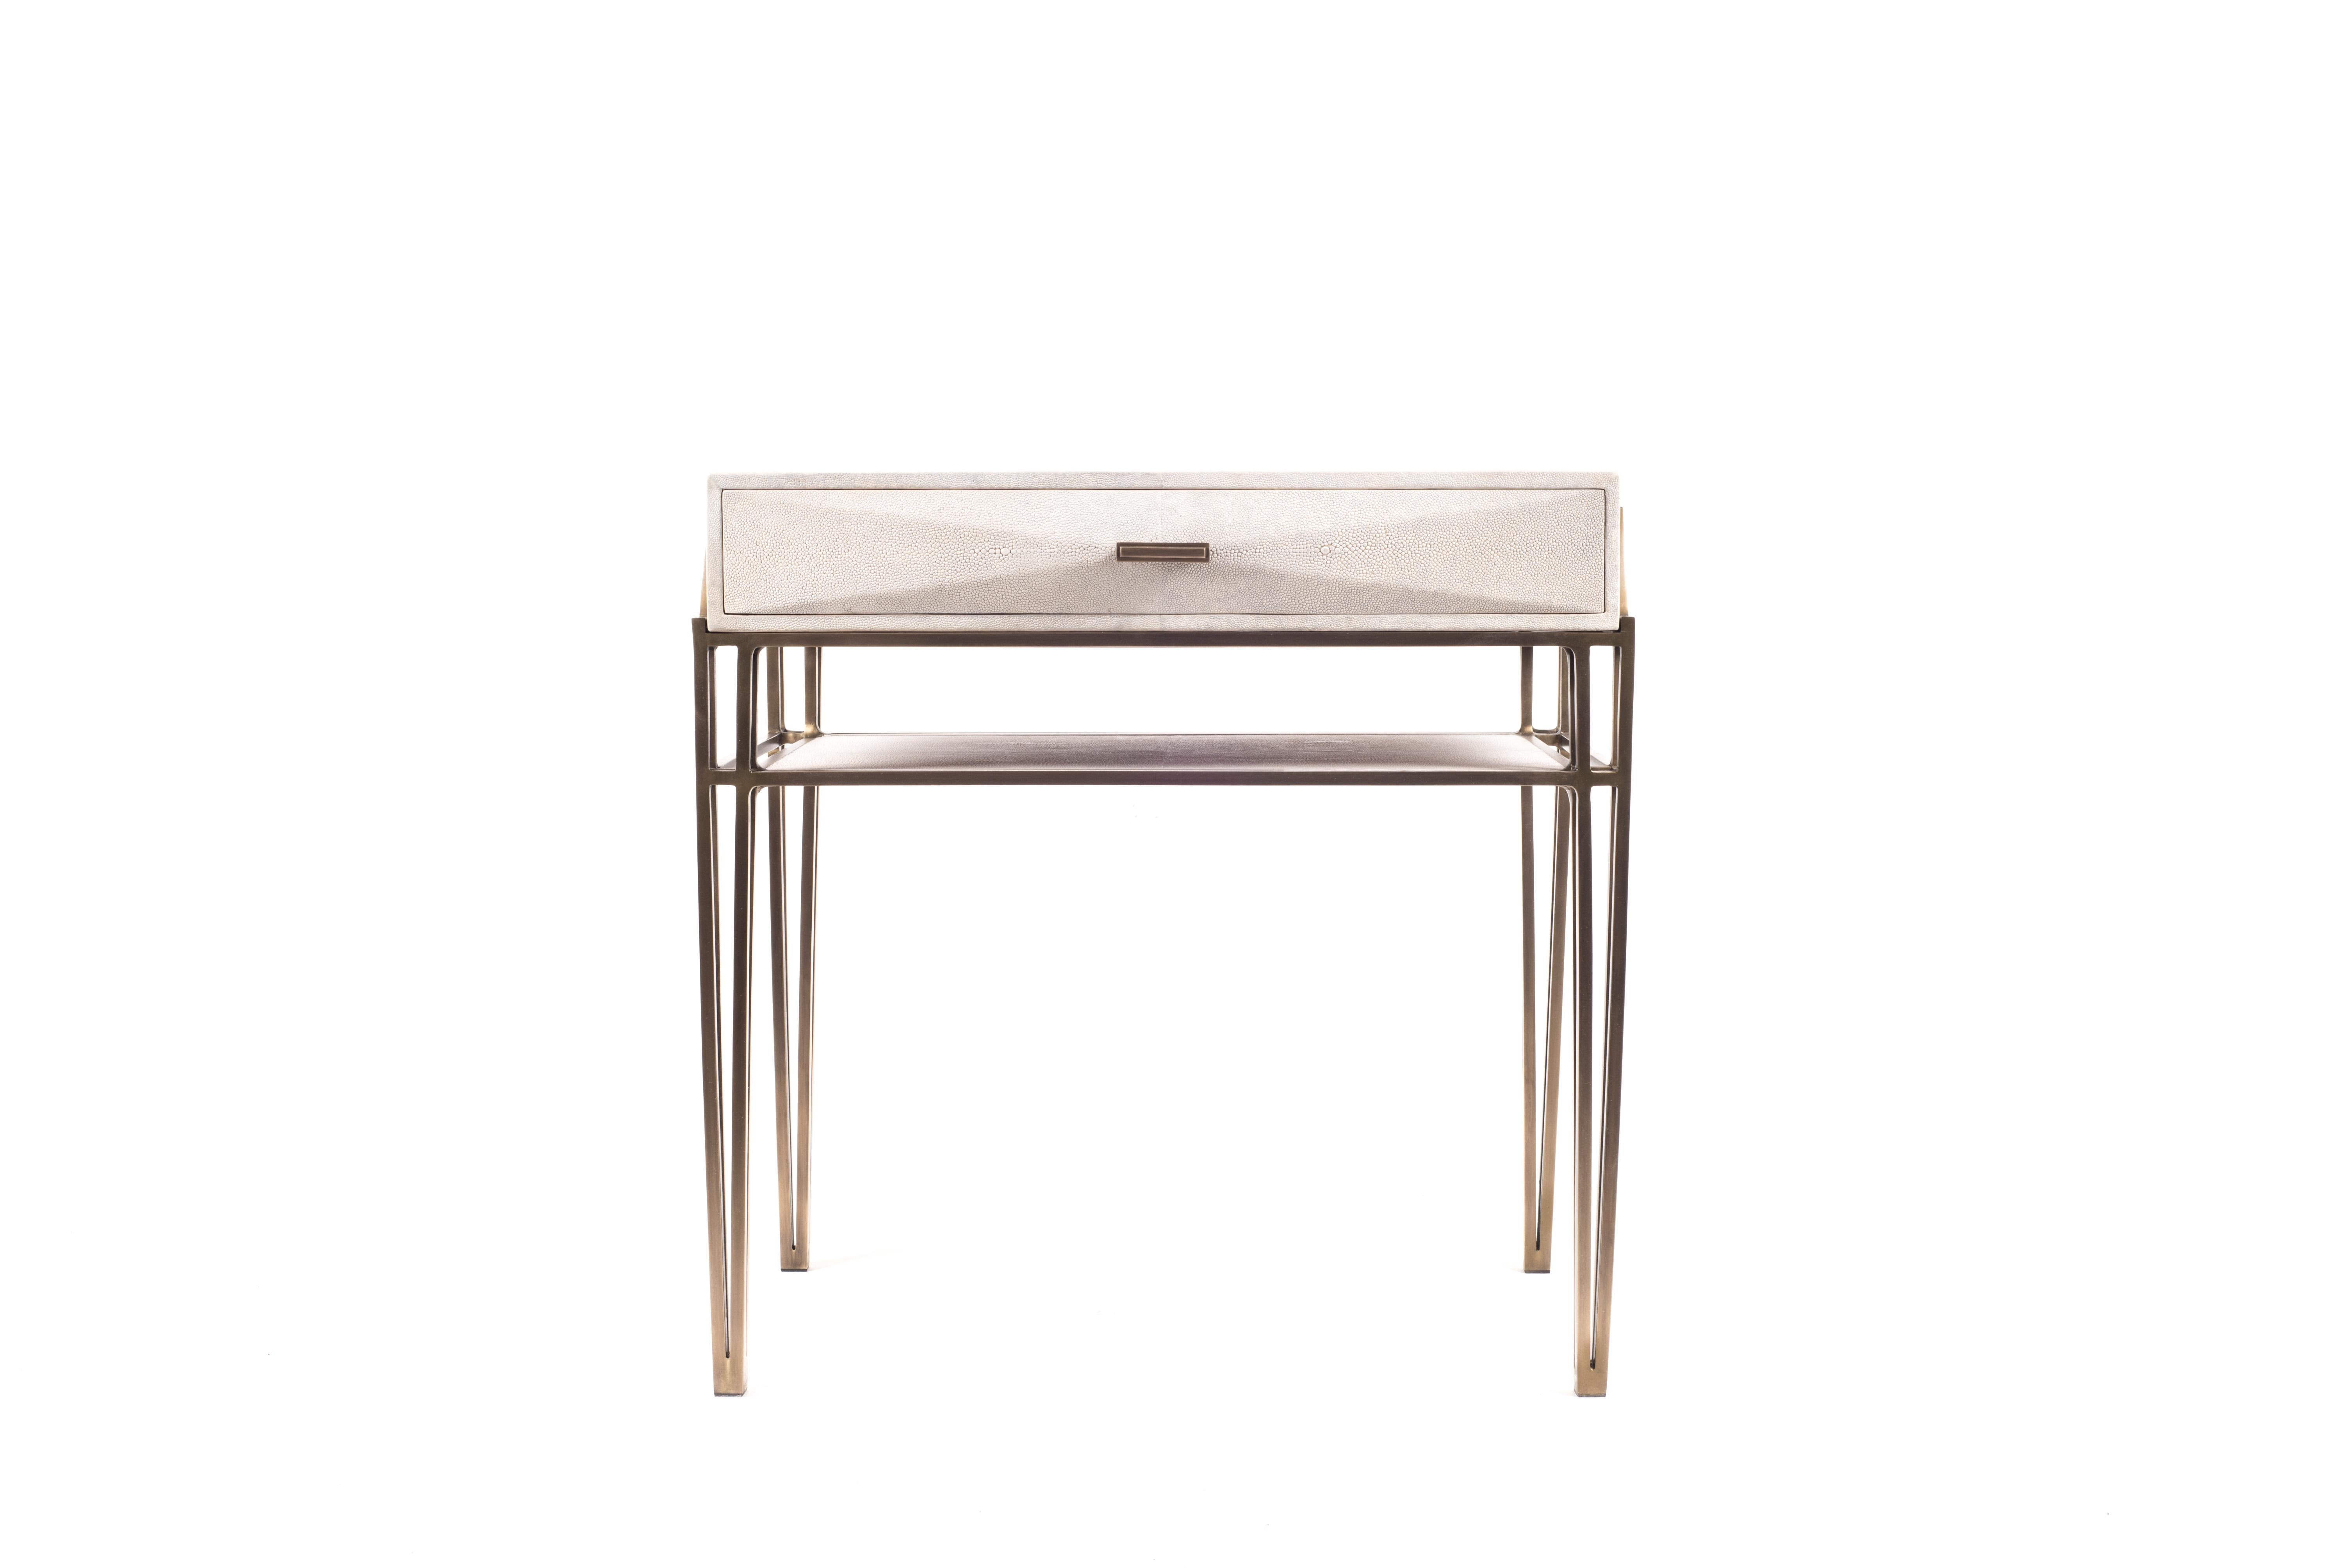 The Cosima bedside table, is both practical and stunning in design. This bedside table is the perfect accent piece for any intimate space. This table has one large drawer, and the top piece in cream shagreen can be removed from the bronze-patina